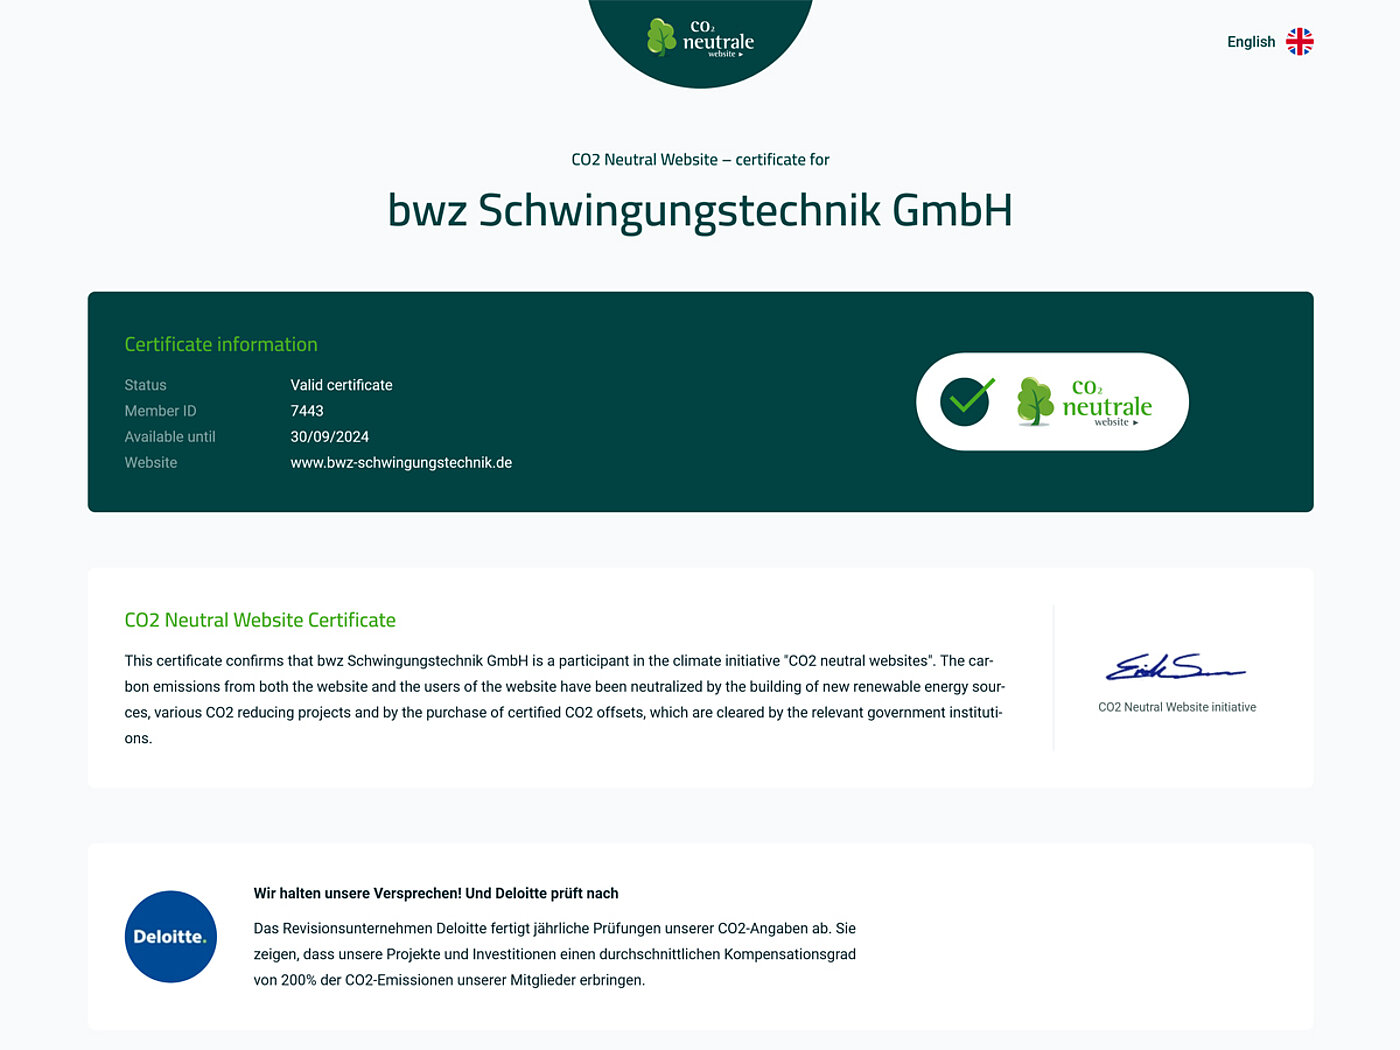 screenshot of the certificate confirming that the website of bwz Schwingungstechnik is CO2-neutral owing to the membership in the climate initiative 'CO2-neutral website', all styled in white and green colours